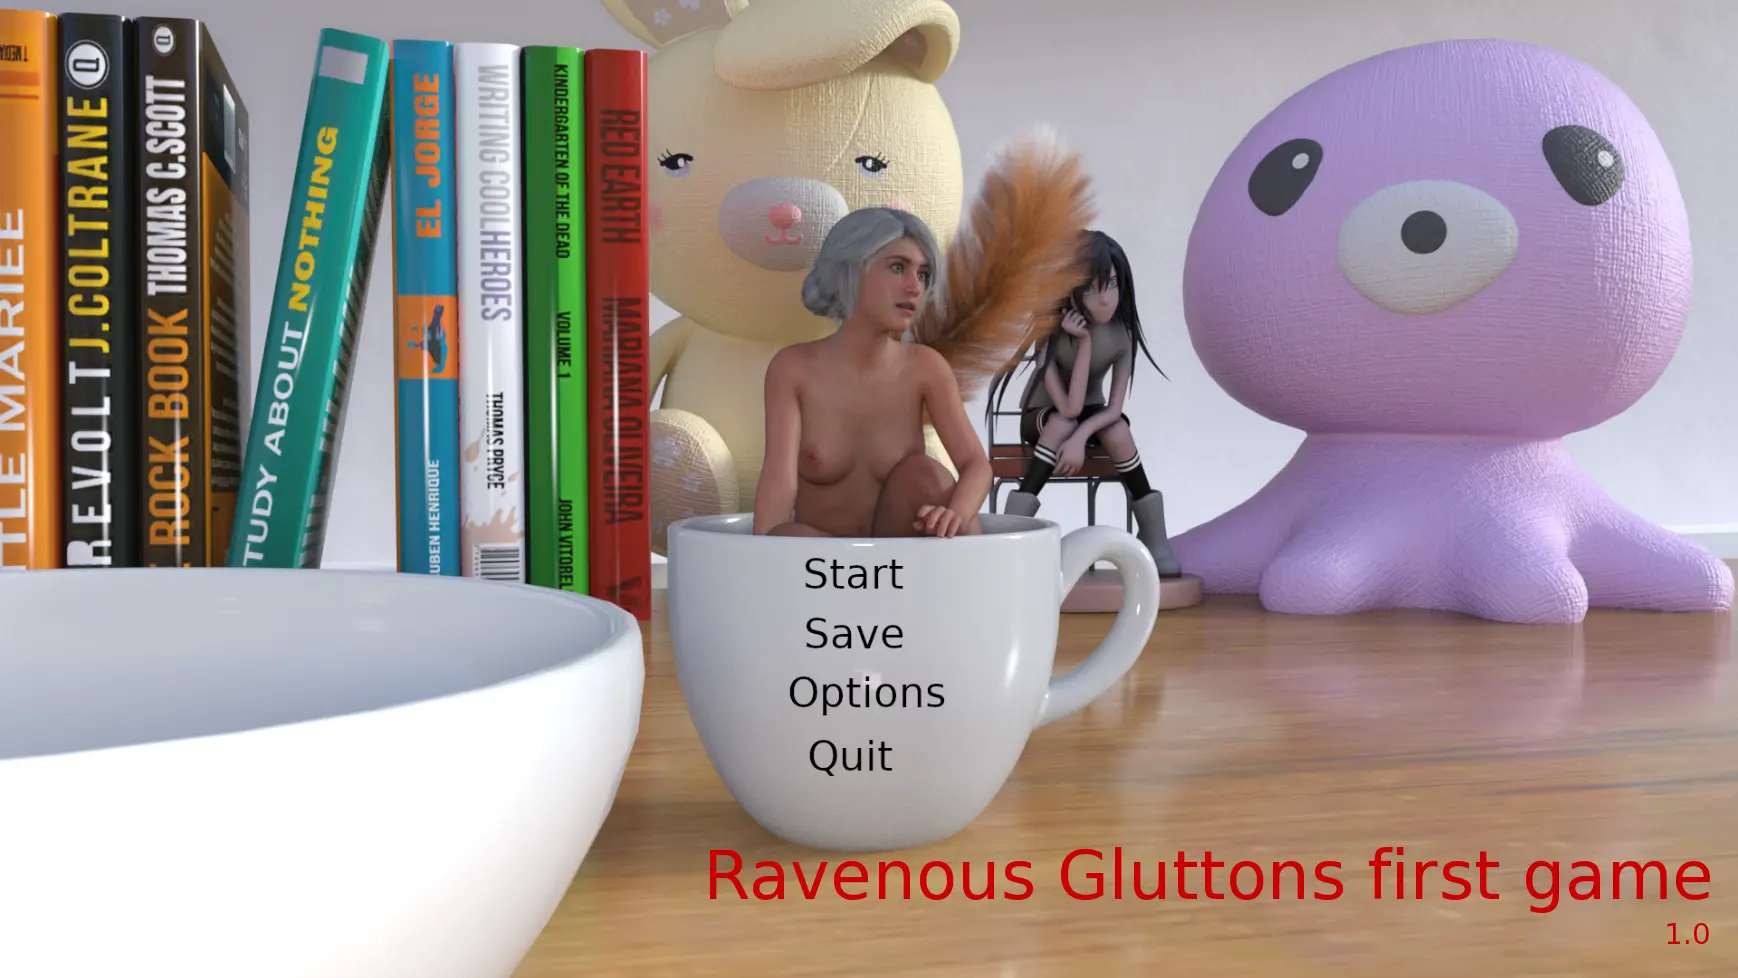 Ravenous Gluttons first game main image